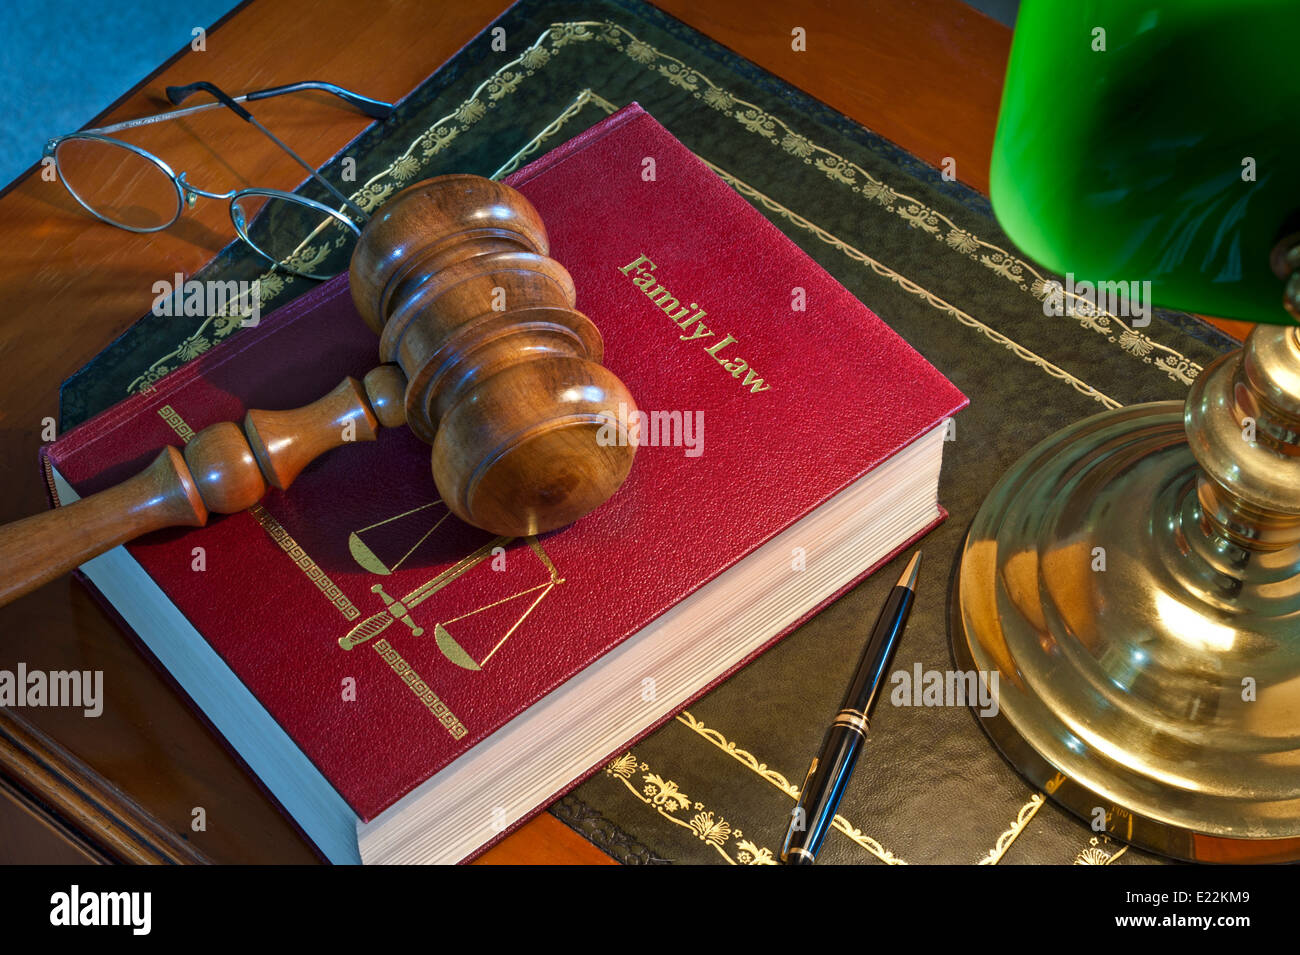 LAW COURT CHAMBERS JUDGE SENTENCING DELIBERATIONS wooden gavel on 'Family Law' book with scales of justice emblem lit by desk lamp on traditional desk Stock Photo